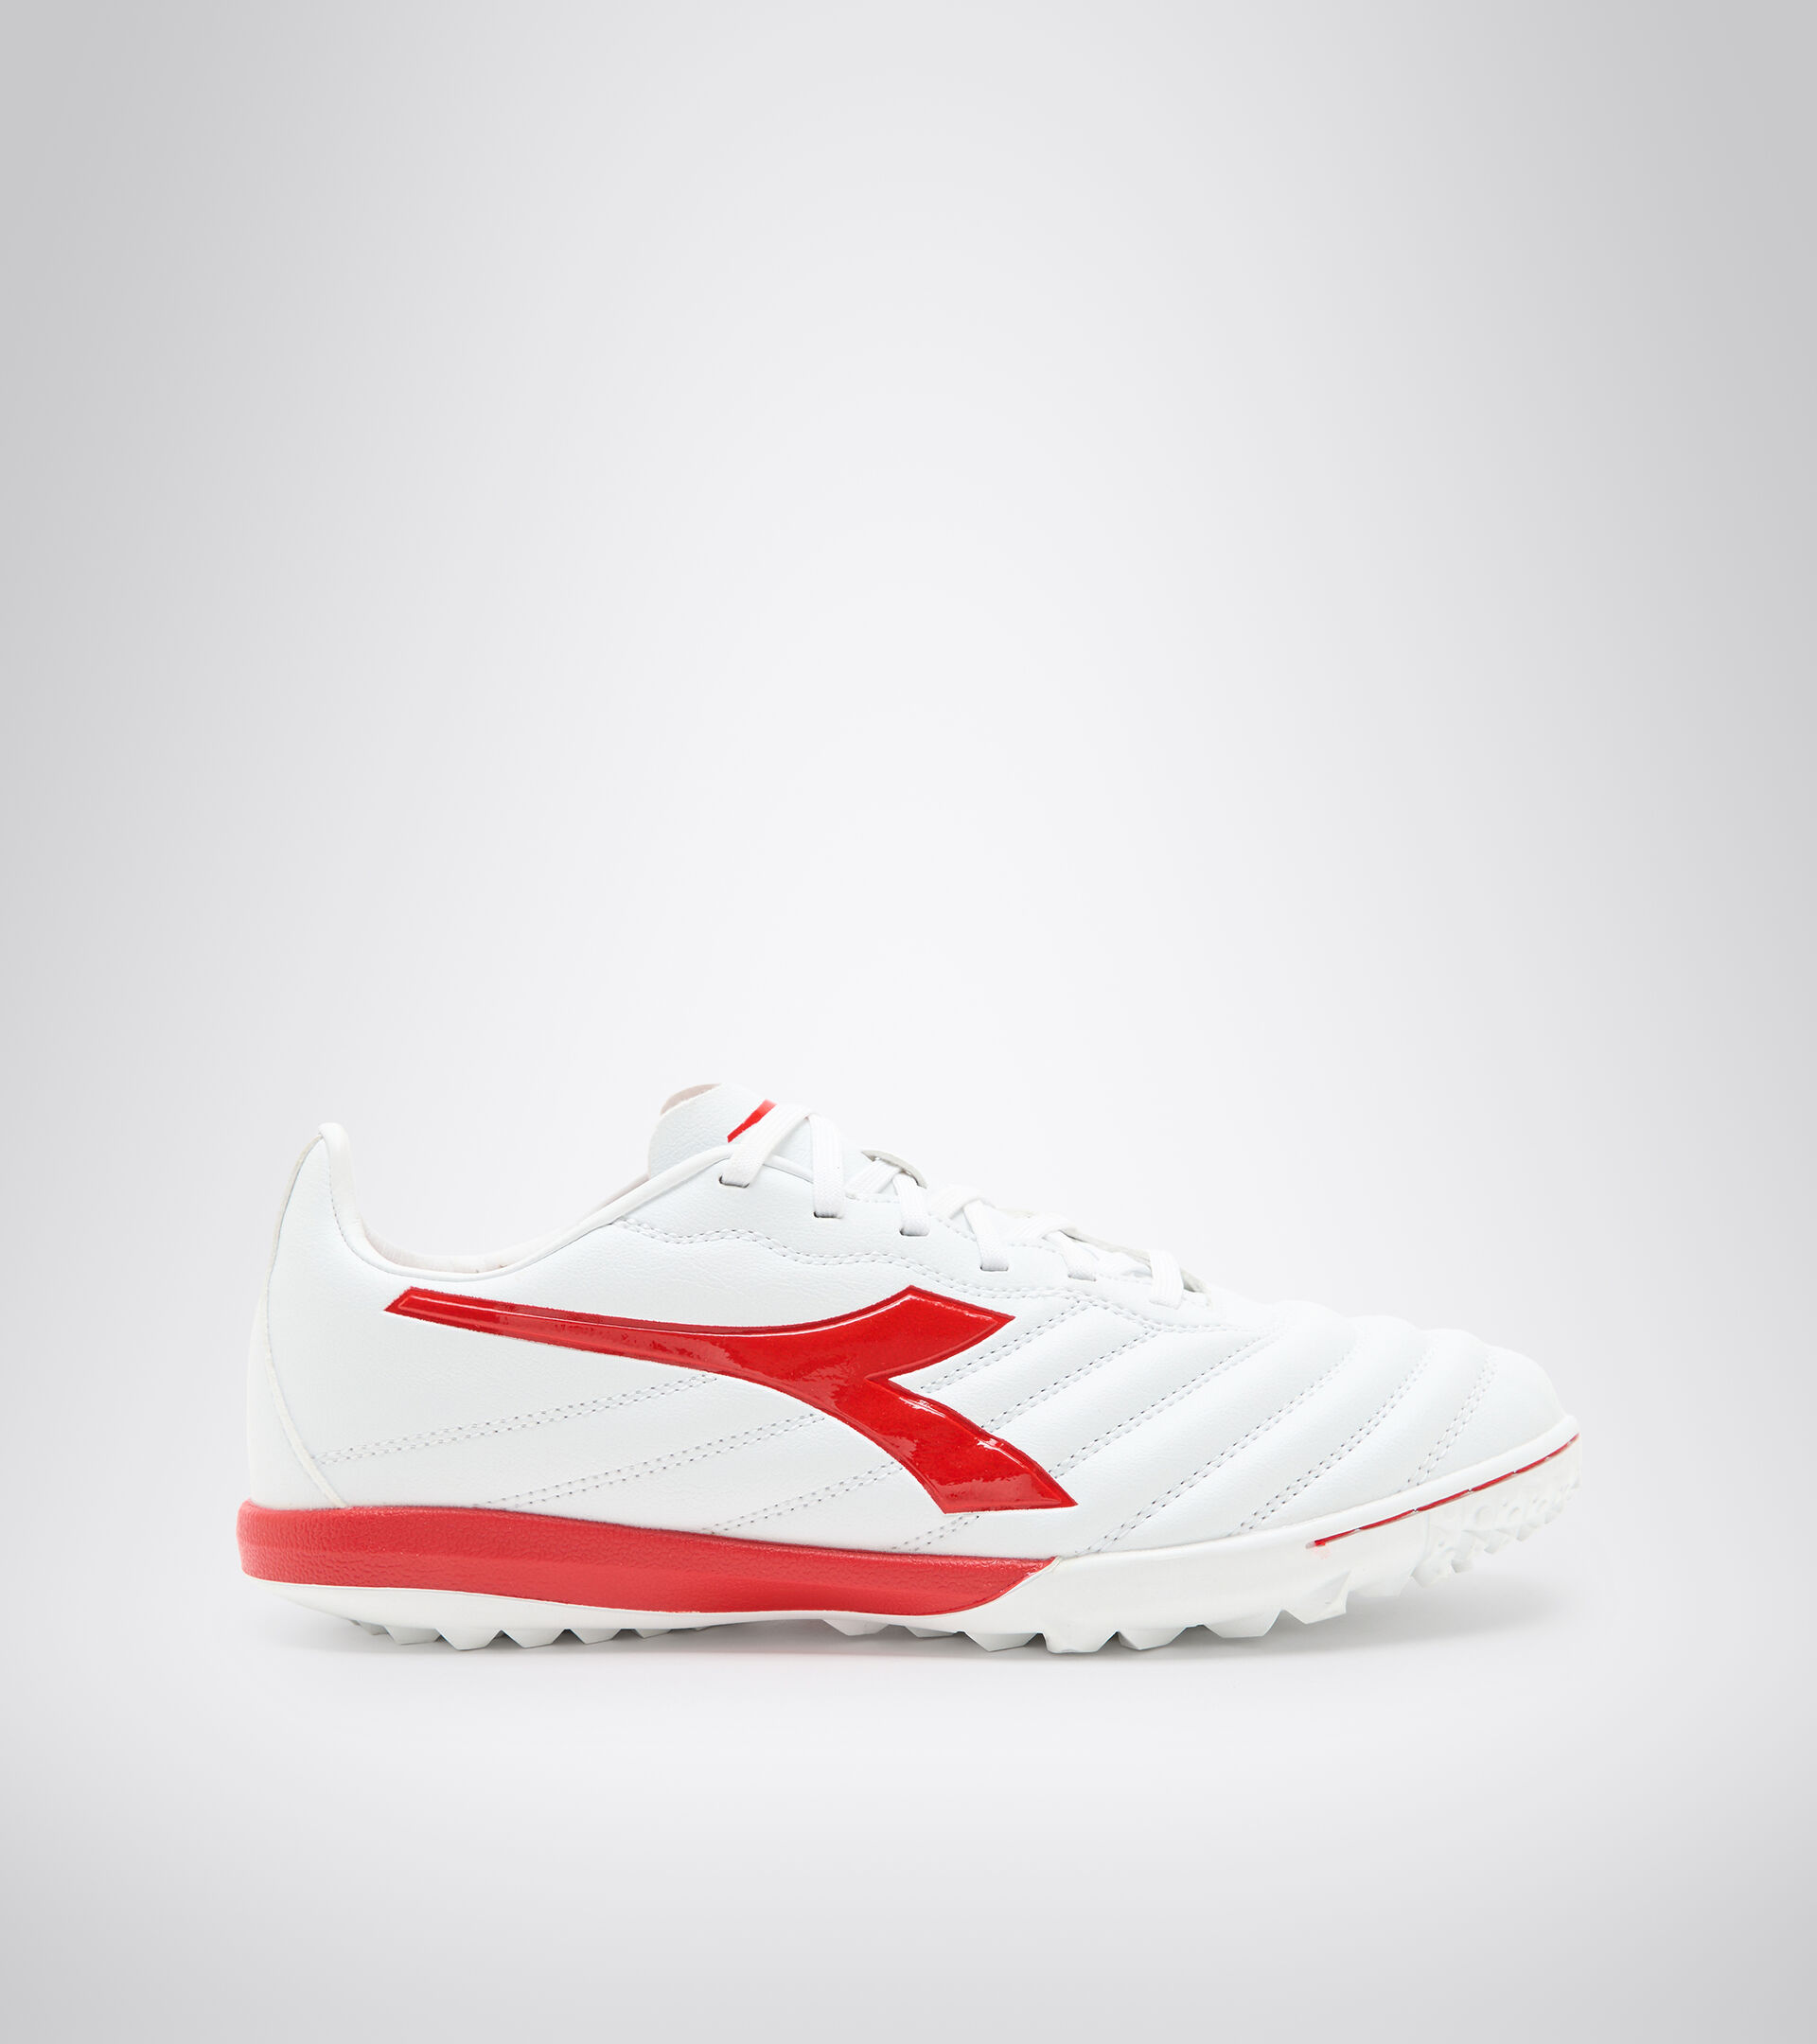 Futsal boot - Specific outsole for synthetic/hard grounds BRASIL ELITE2 R TFR WHITE/MILANO RED - Diadora